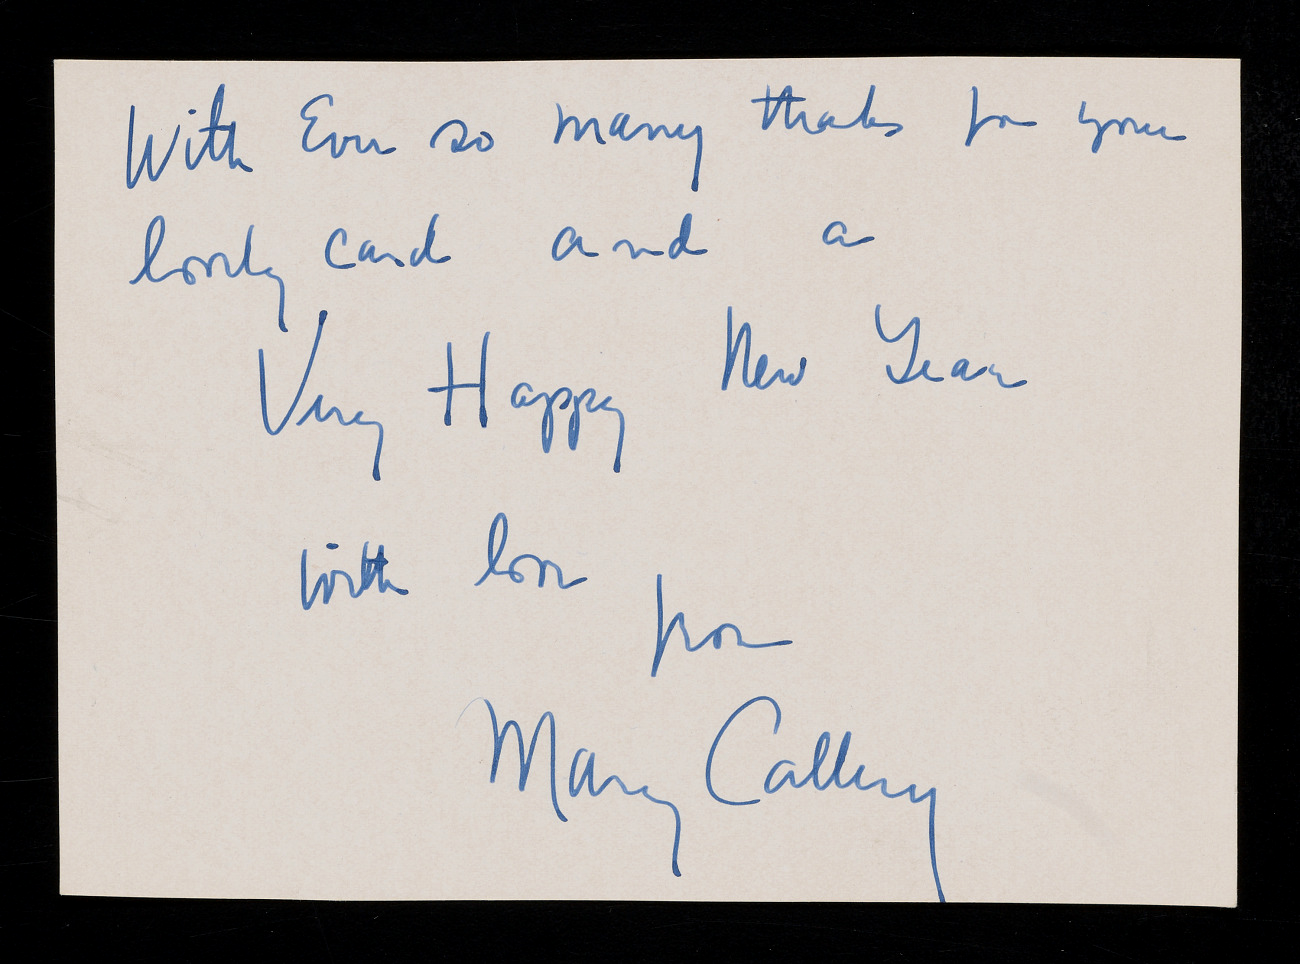 Note from Mary Callery to the Tremaines from Emily Hall Tremaine's artist files.